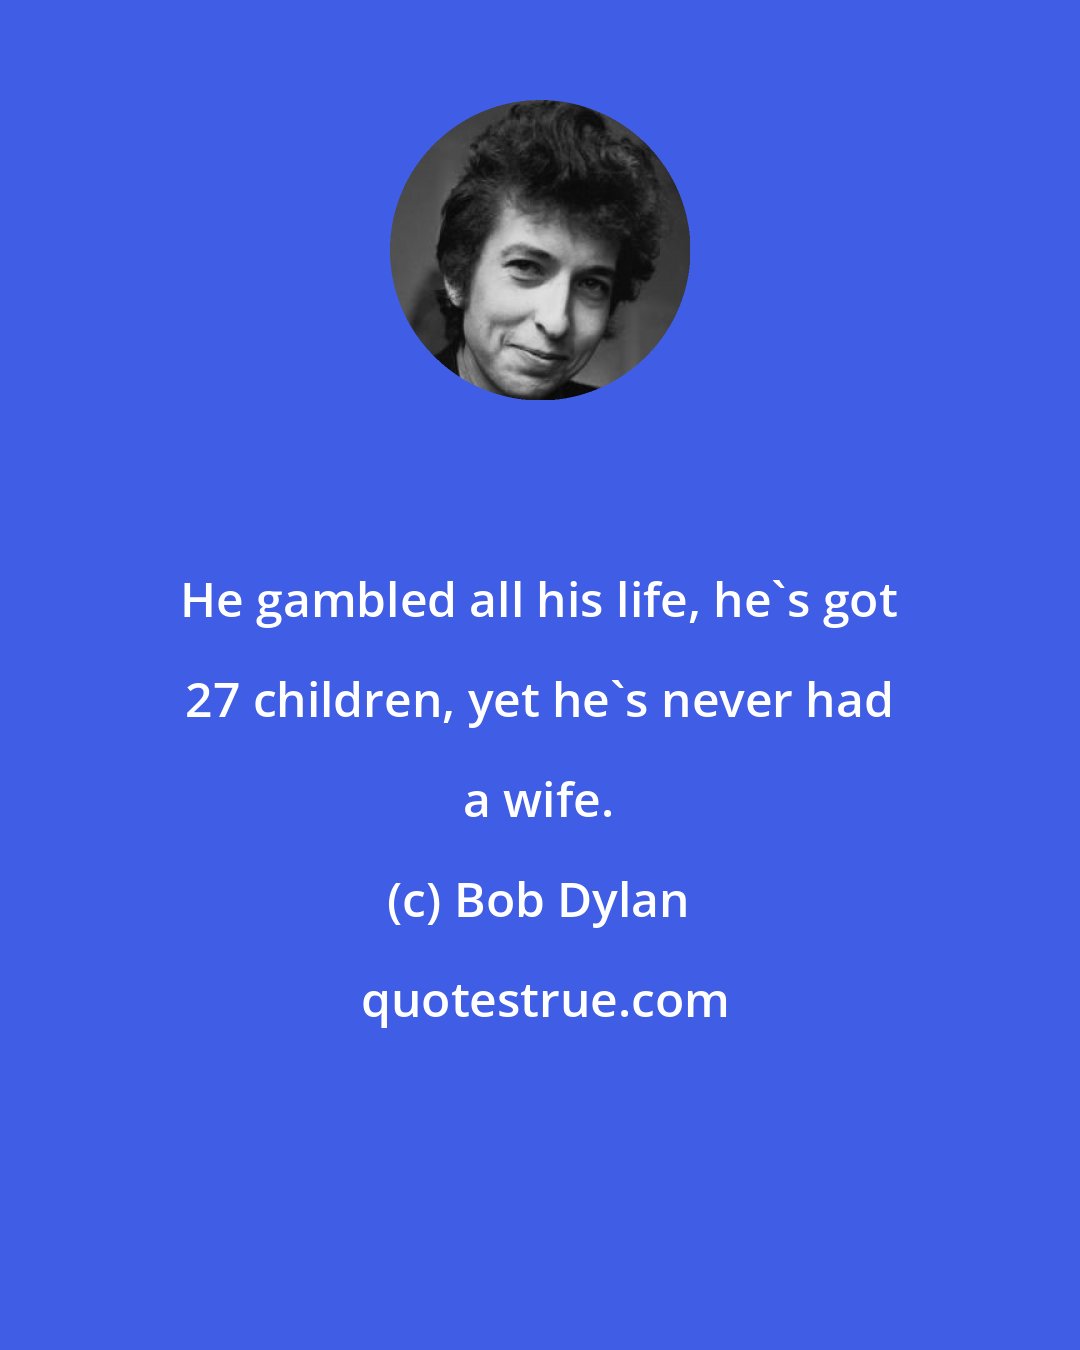 Bob Dylan: He gambled all his life, he's got 27 children, yet he's never had a wife.